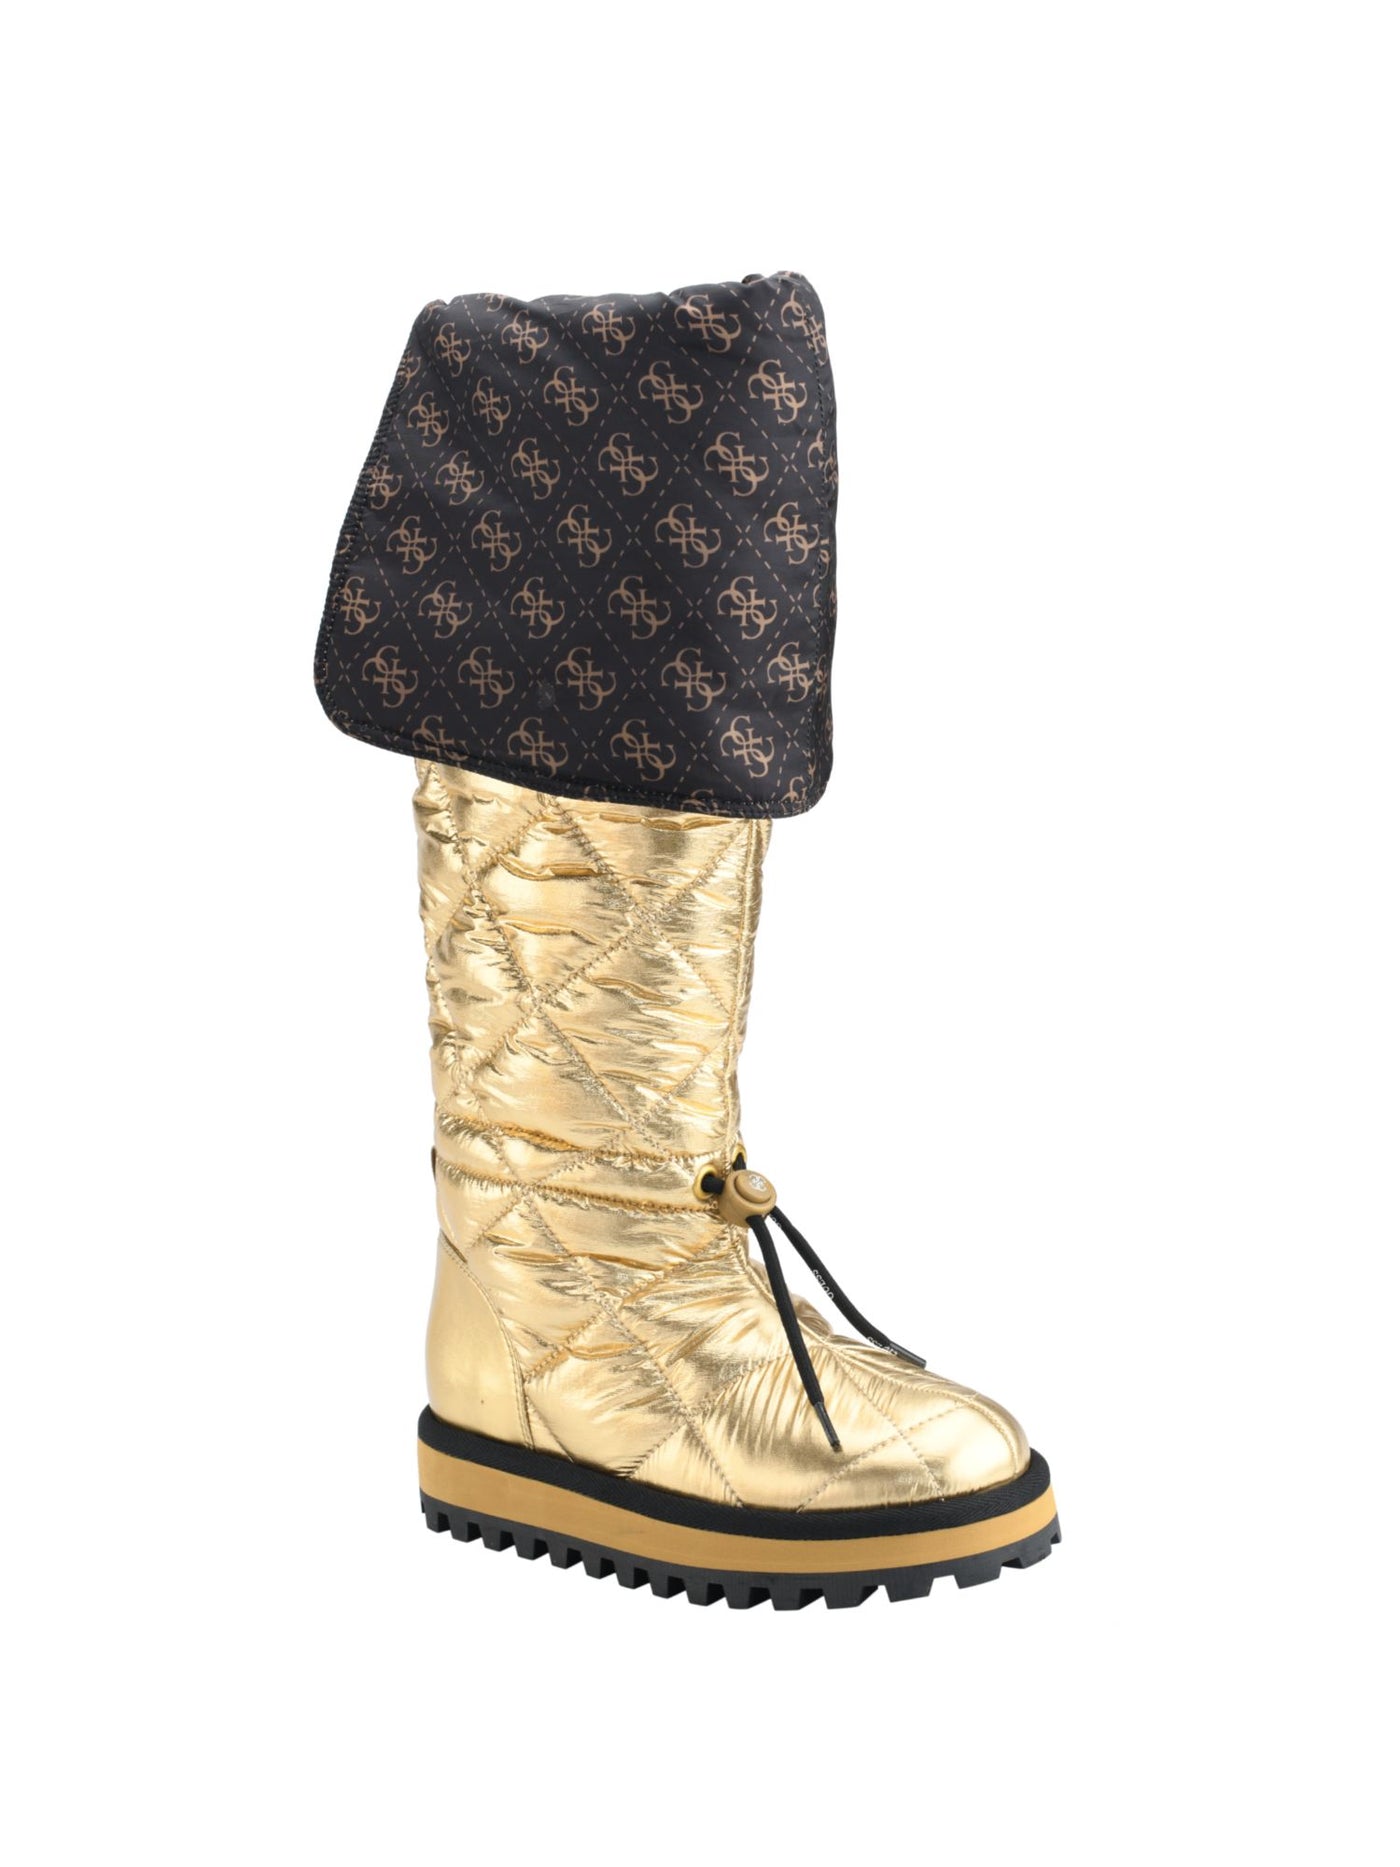 GUESS Womens Gold Lug Sole Quilted Ladiva Round Toe Platform Winter 8 M